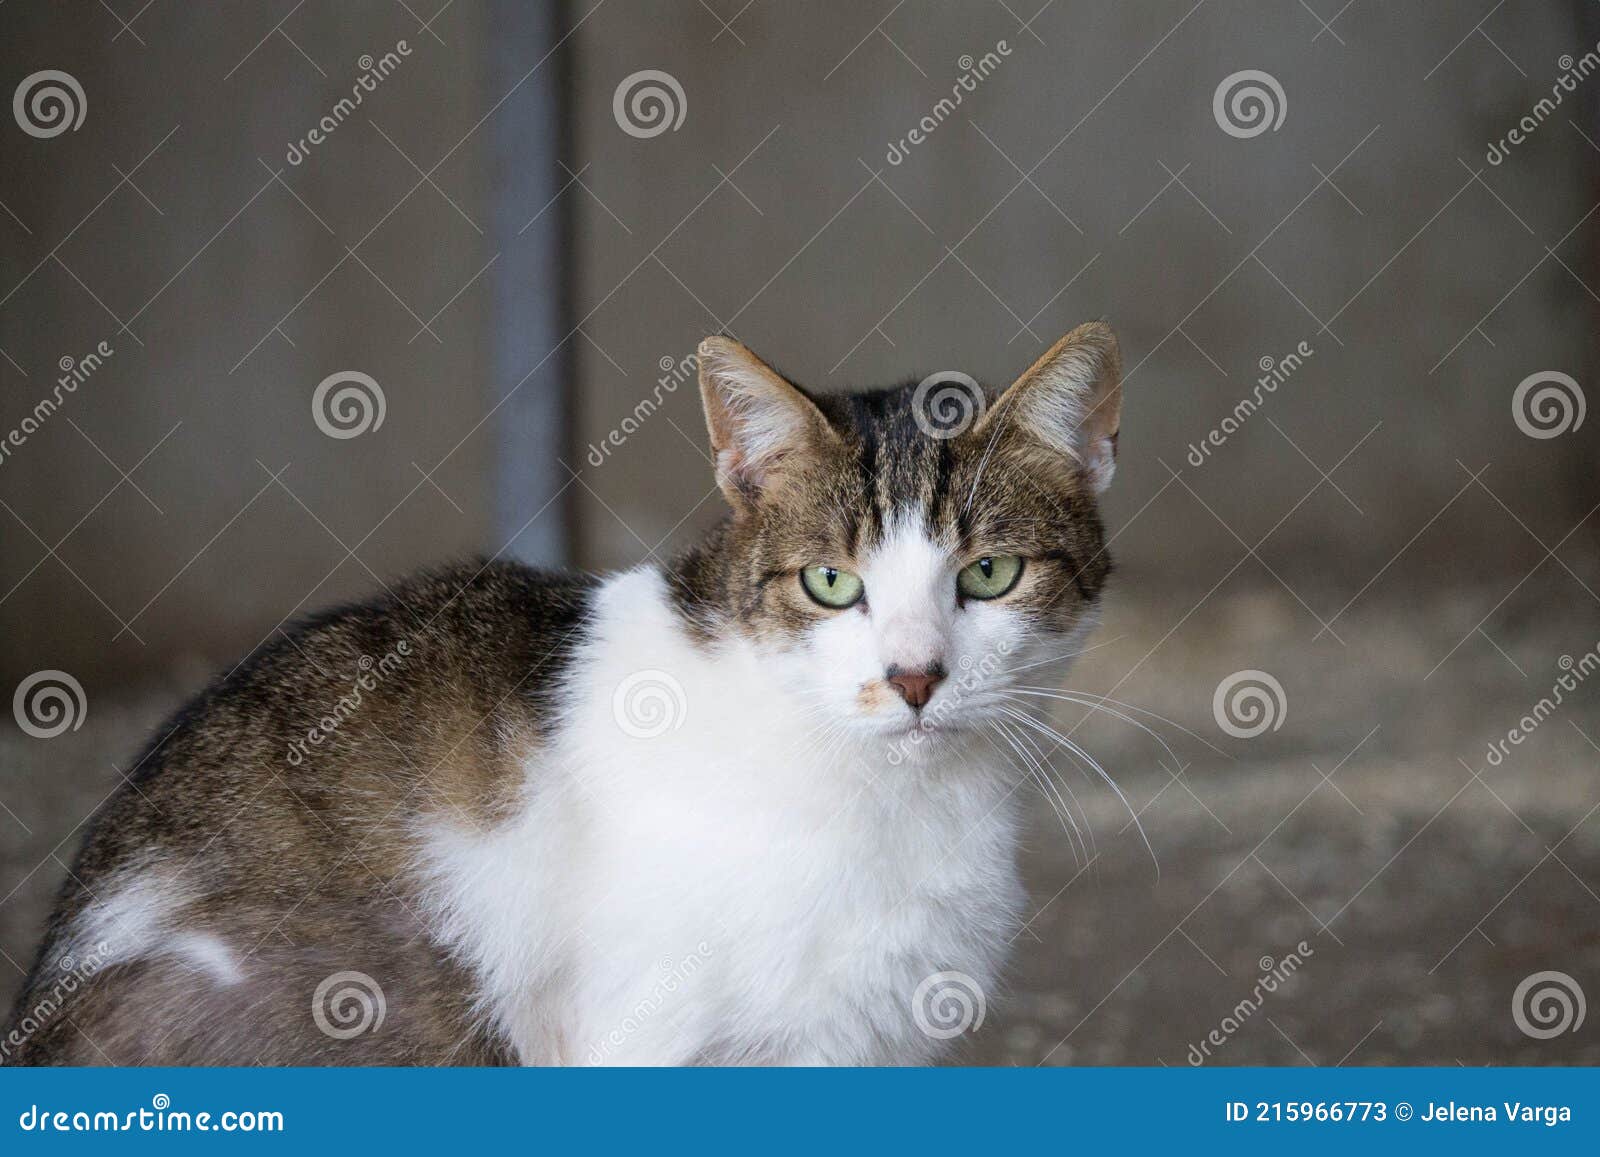 12 278 Cat Shelter Photos Free Royalty Free Stock Photos From Dreamstime